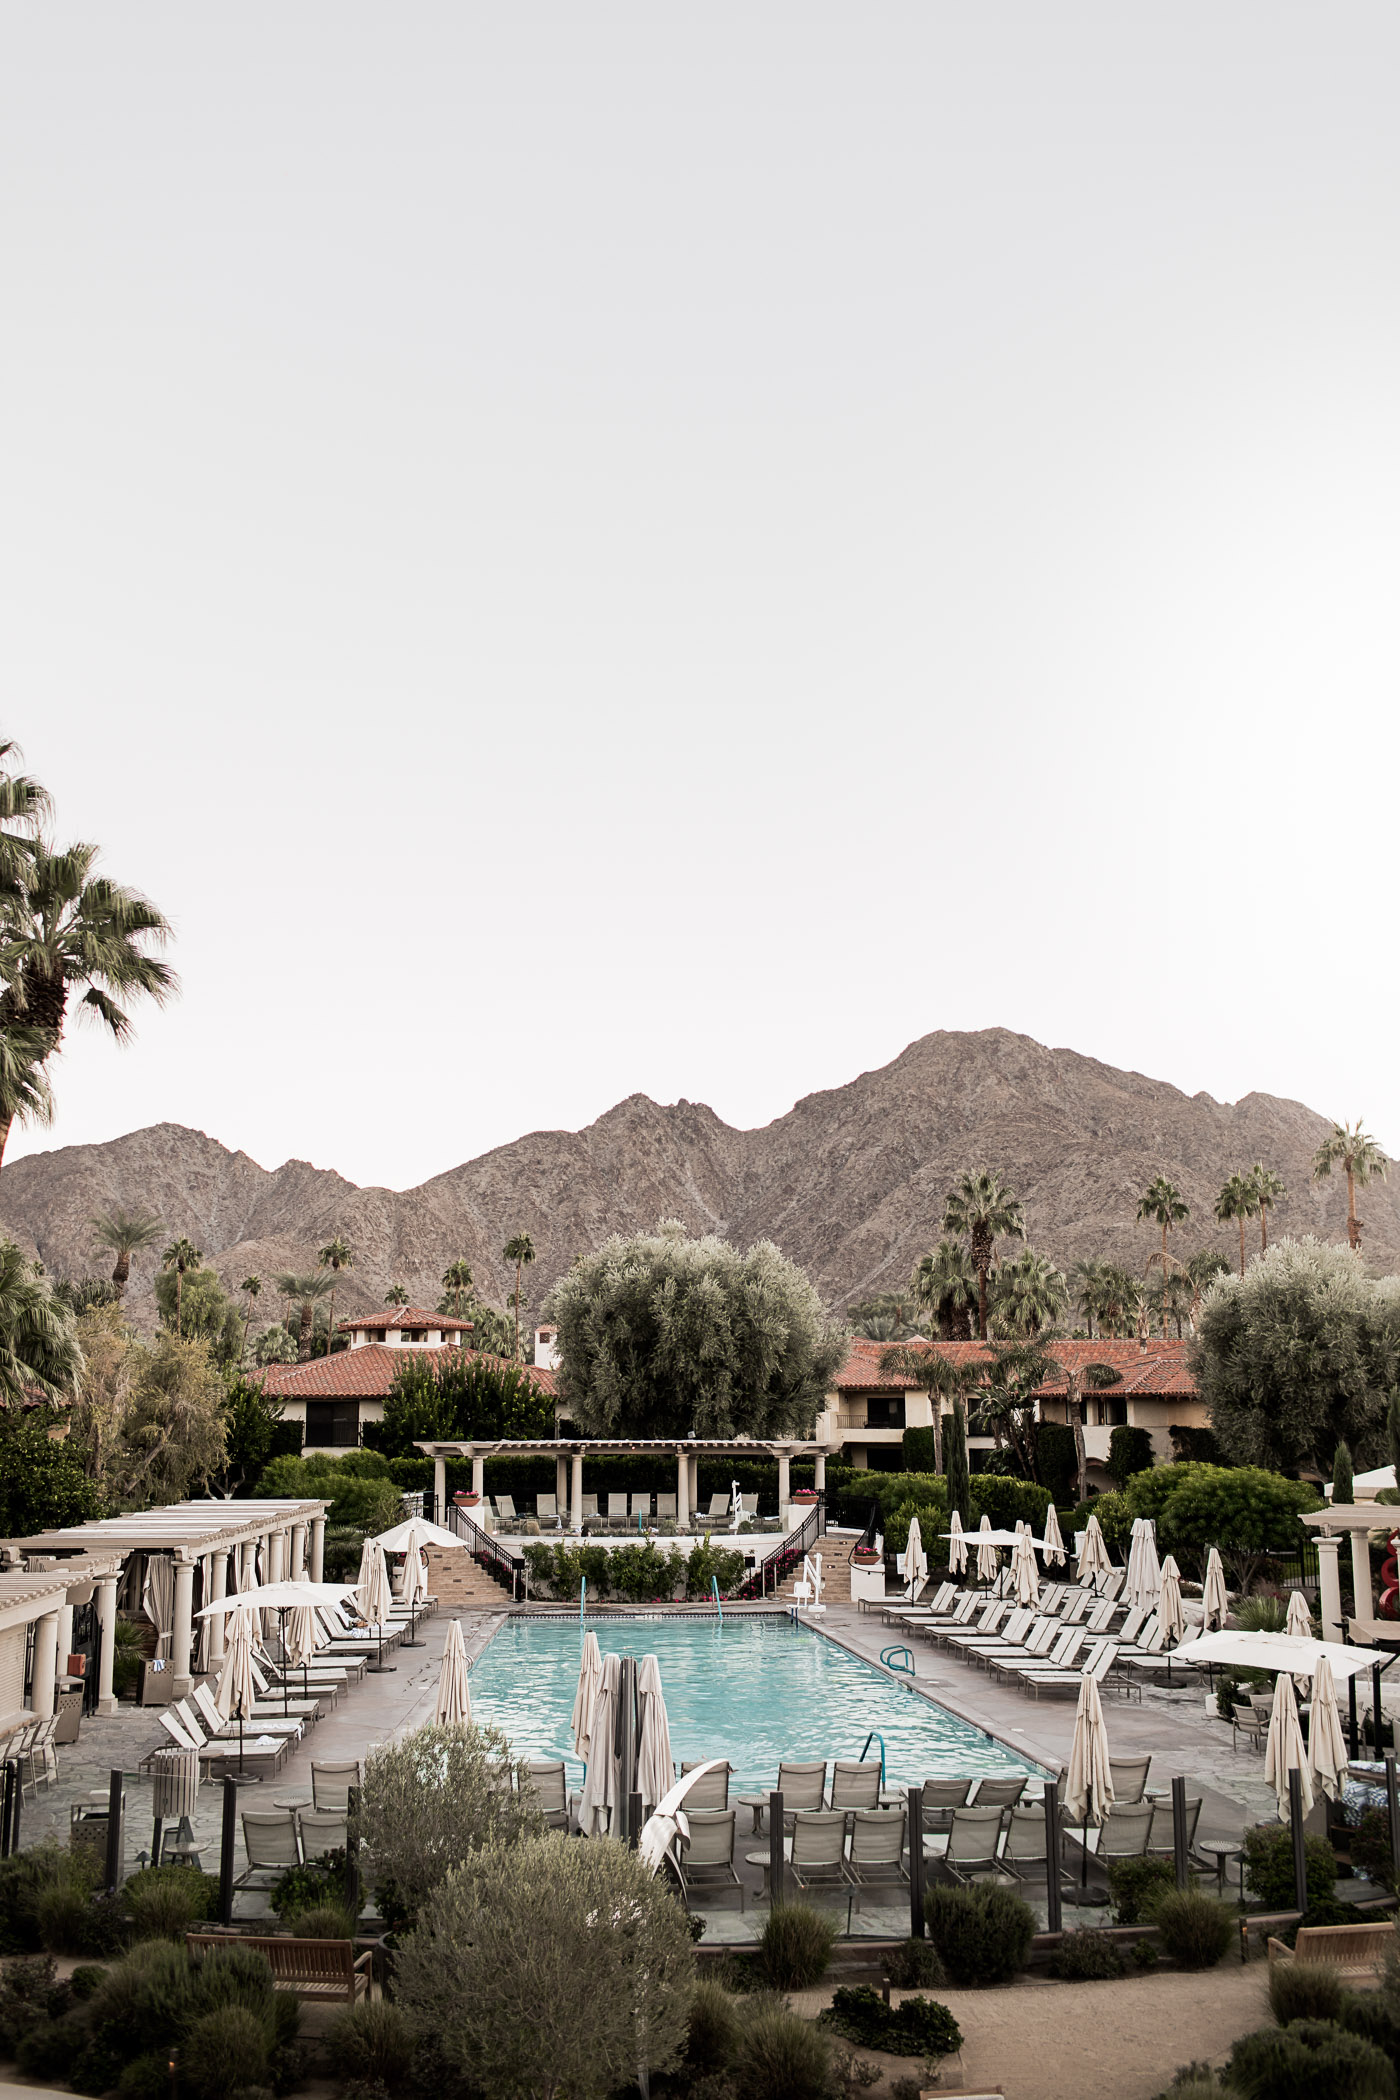 Where to stay for 3 days in Greater Palm Springs - Miramonte Resort & Spa in Indian Wells